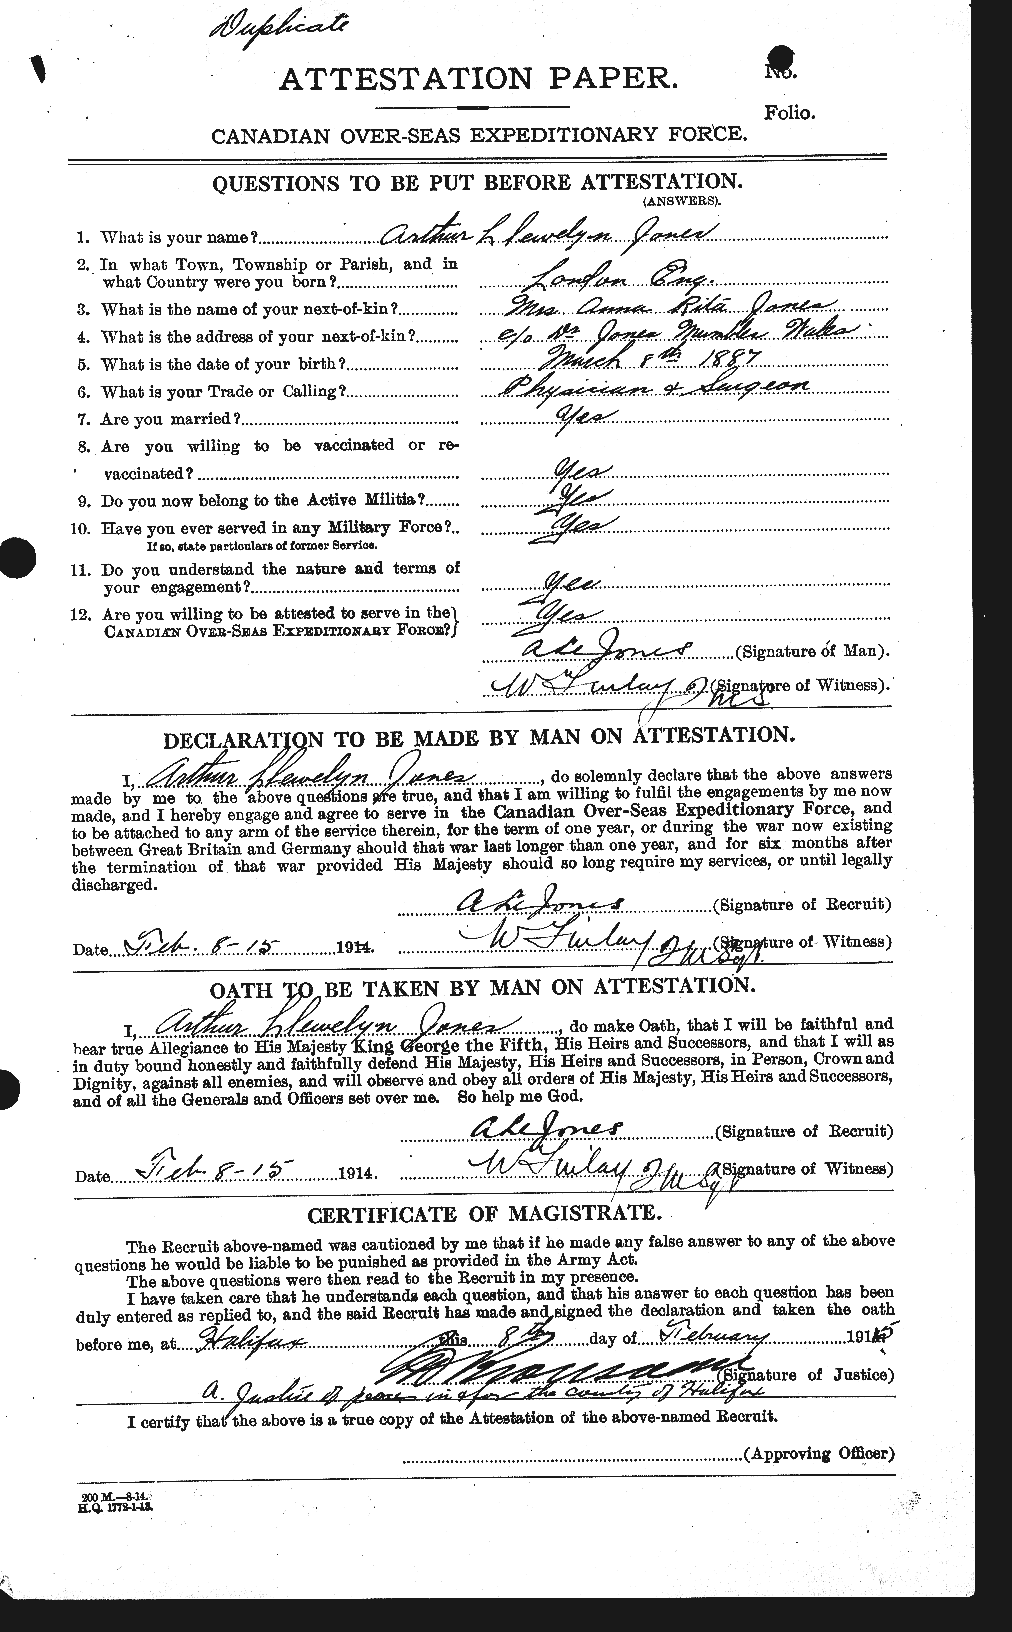 Personnel Records of the First World War - CEF 423699a